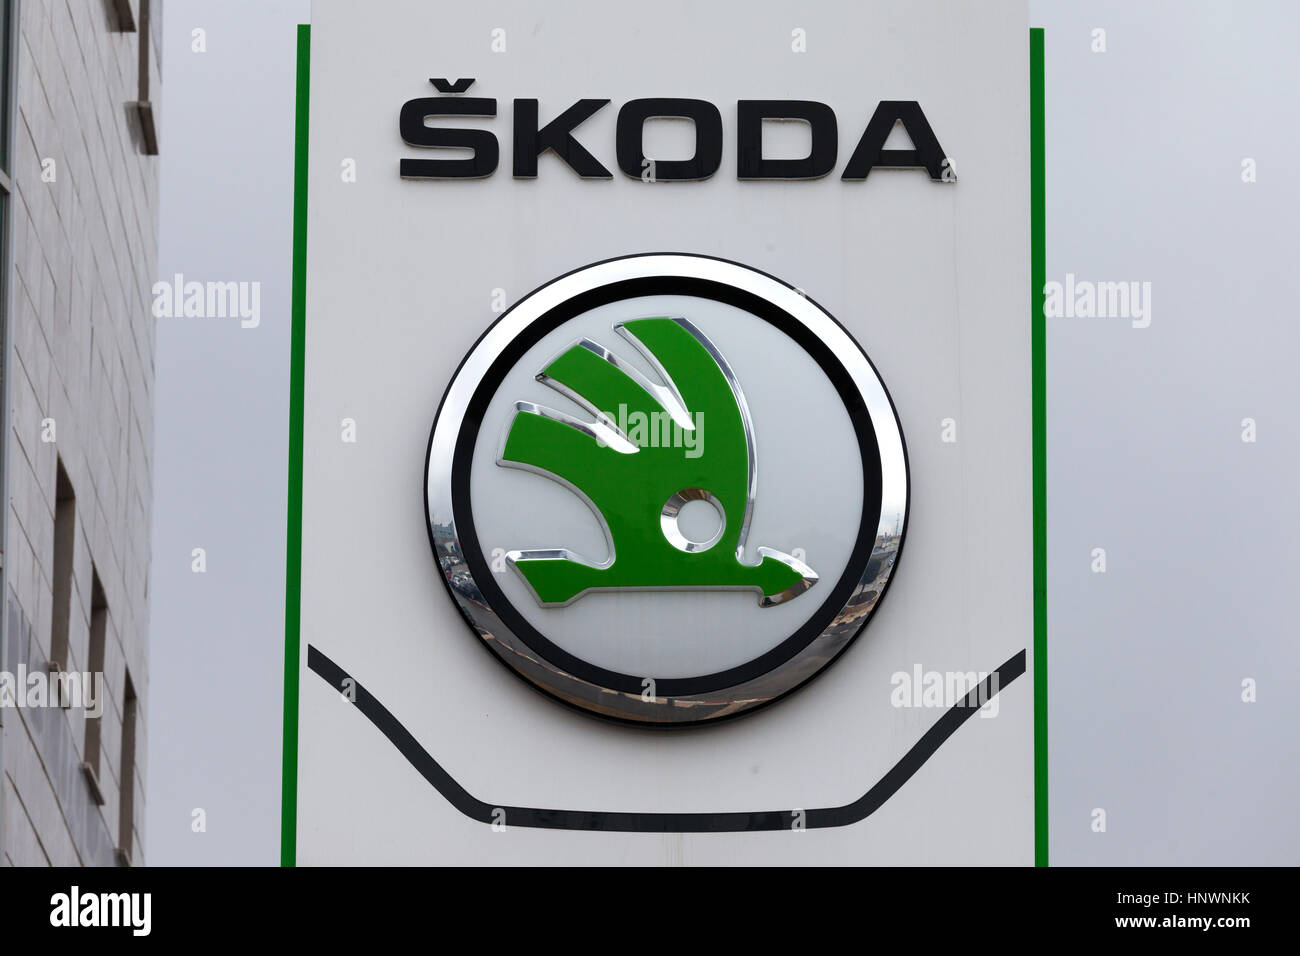 Skoda emblem at one of Skoda's auto dealerships, Skoda became a wholly owned subsidiary of the Volkswagen Group in 2000 Stock Photo